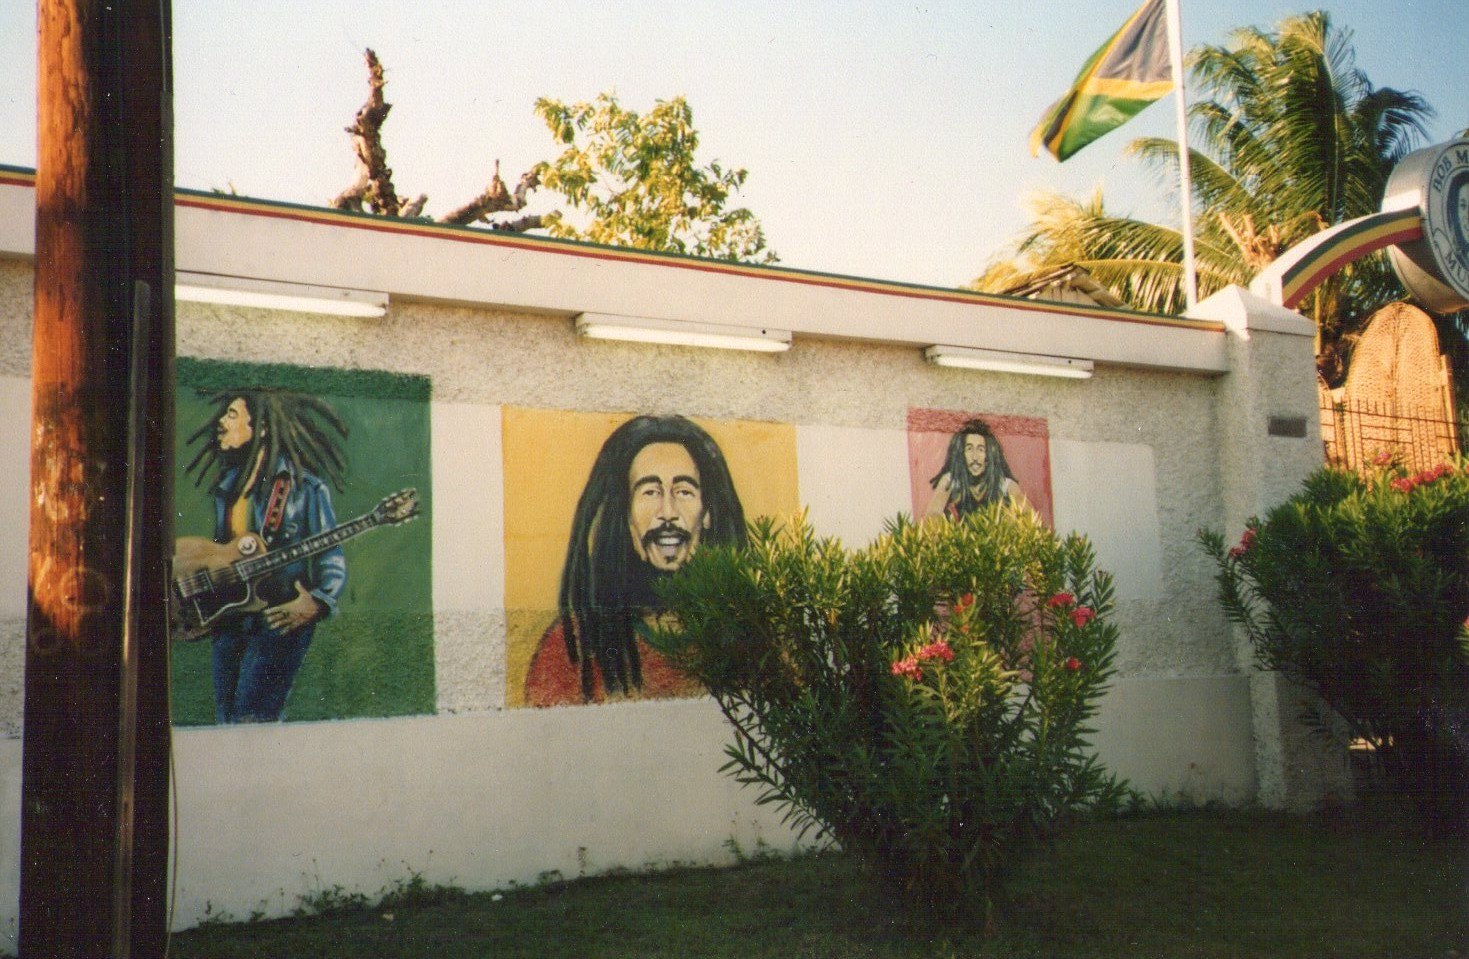 6 Reasons To Visit The Bob Marley Museum in Jamaica